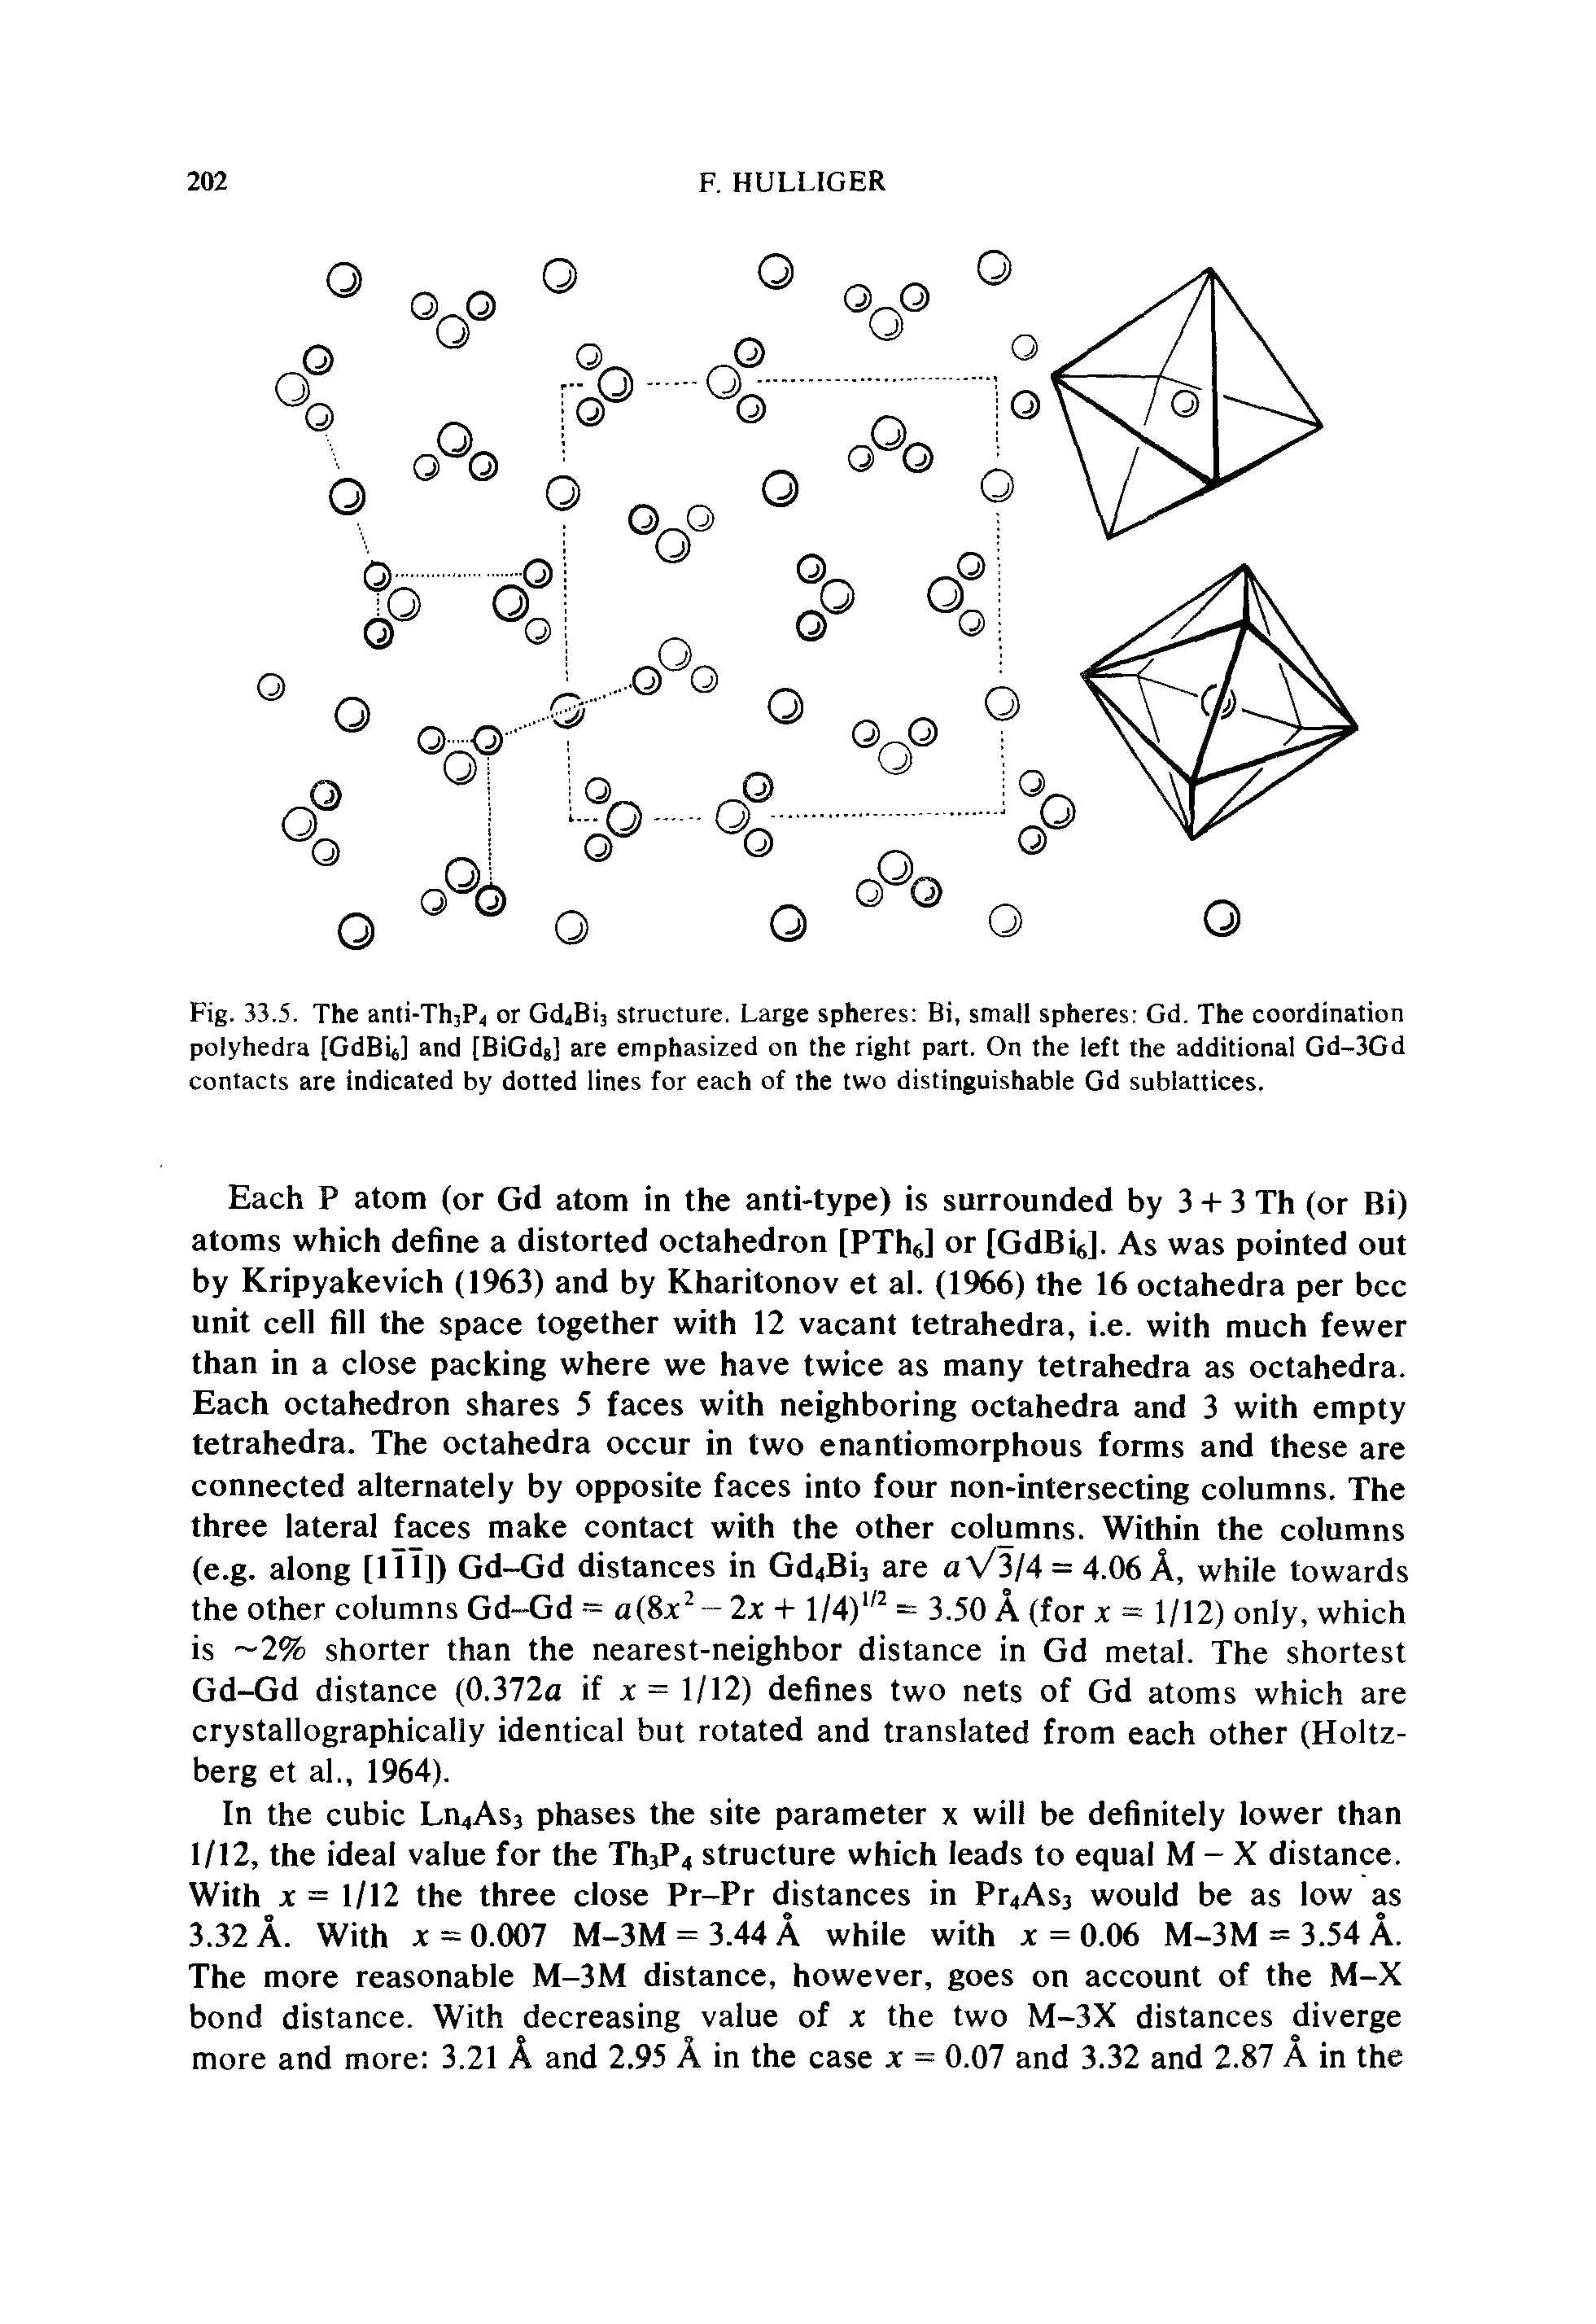 Fig. 33,5. The anti-Th3P4 or Gd Bis structure. Large spheres Bi, small spheres Gd. The coordination polyhedra [GdBij] and [BiGde] are emphasized on the right part. On the left the additional Gd-3Gd contacts are indicated by dotted lines for each of the two distinguishable Gd sublattices.